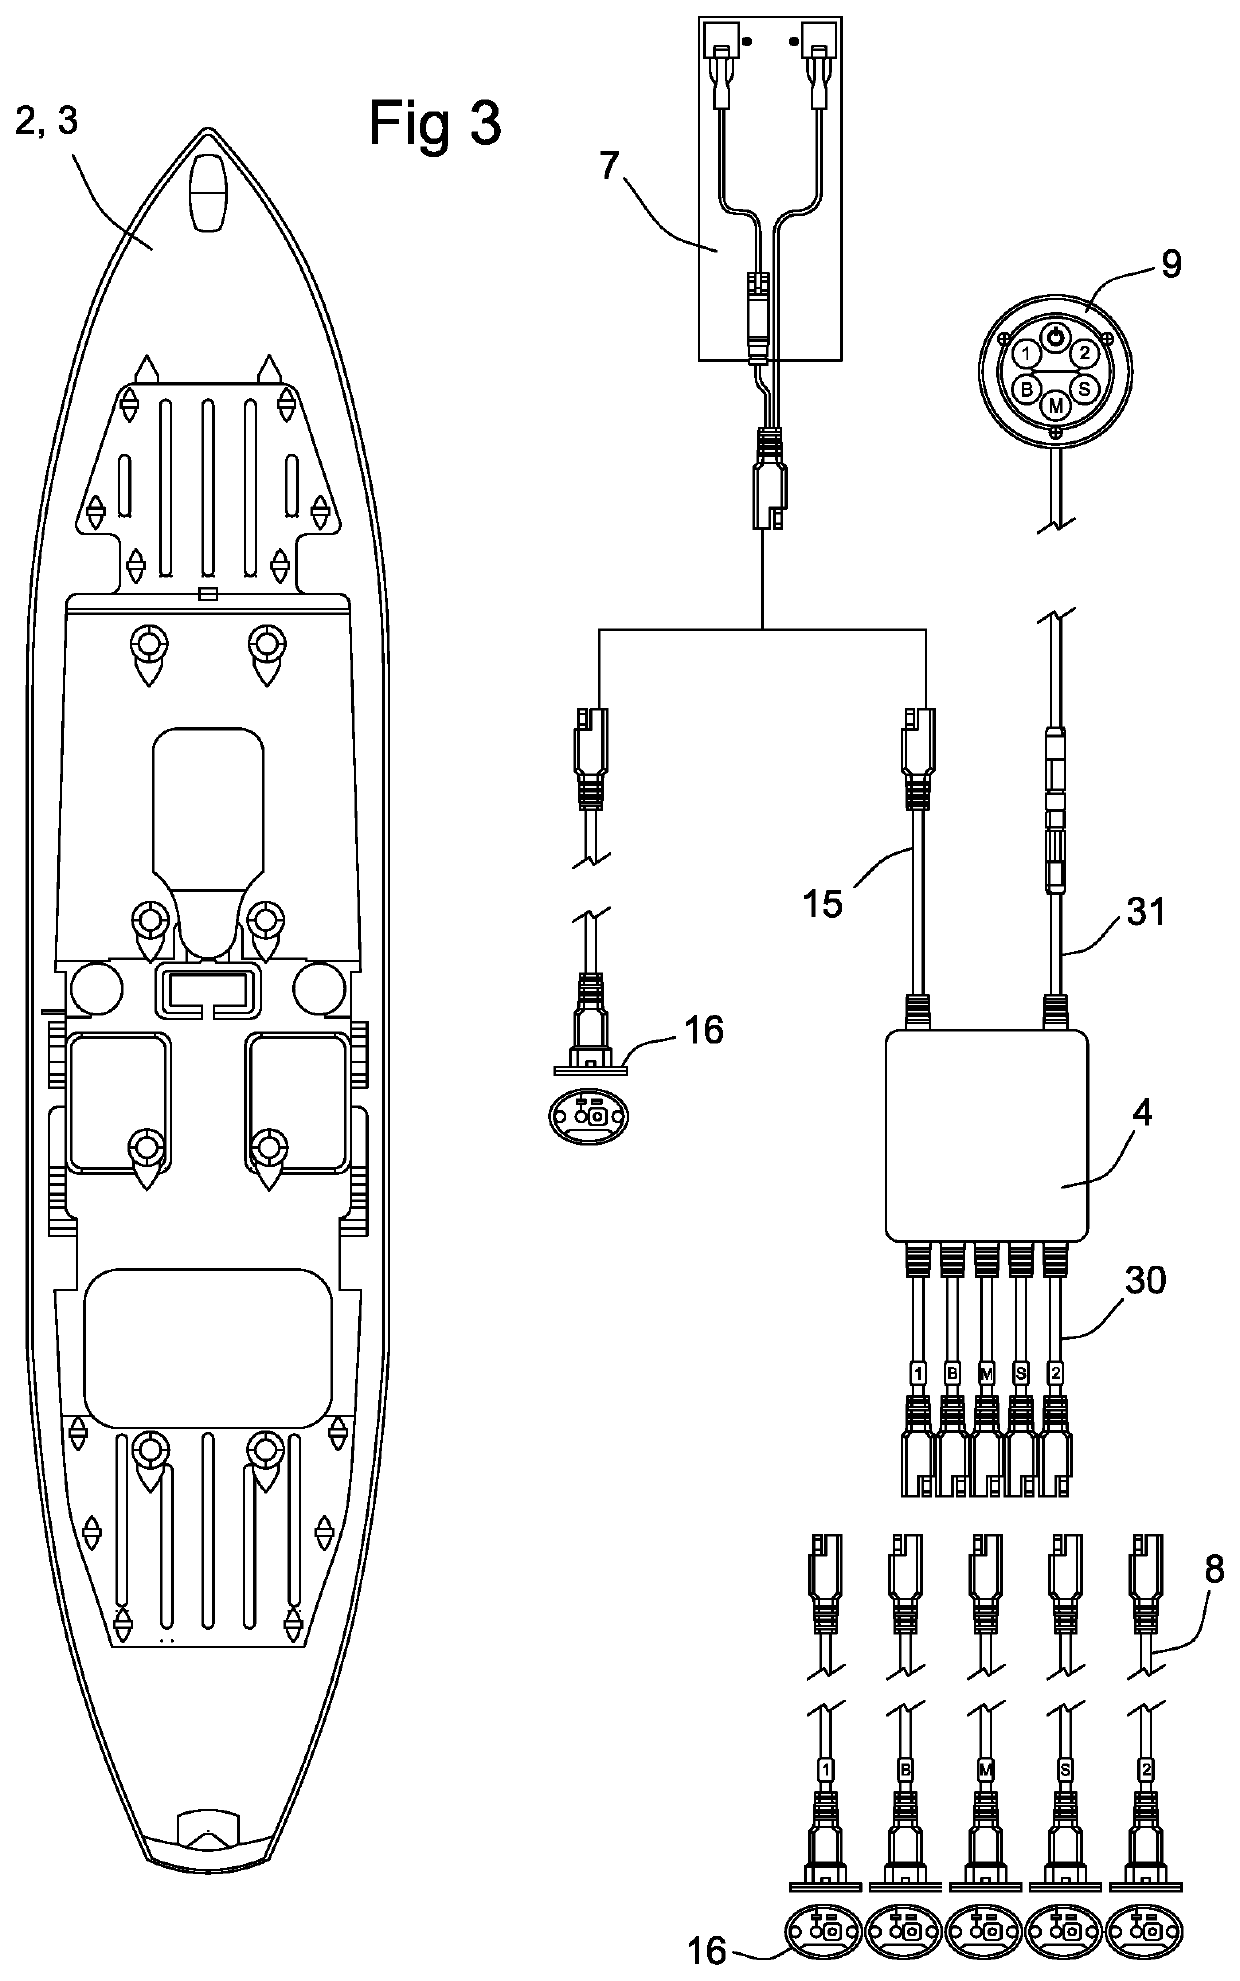 Electrical distribution system for personal water craft